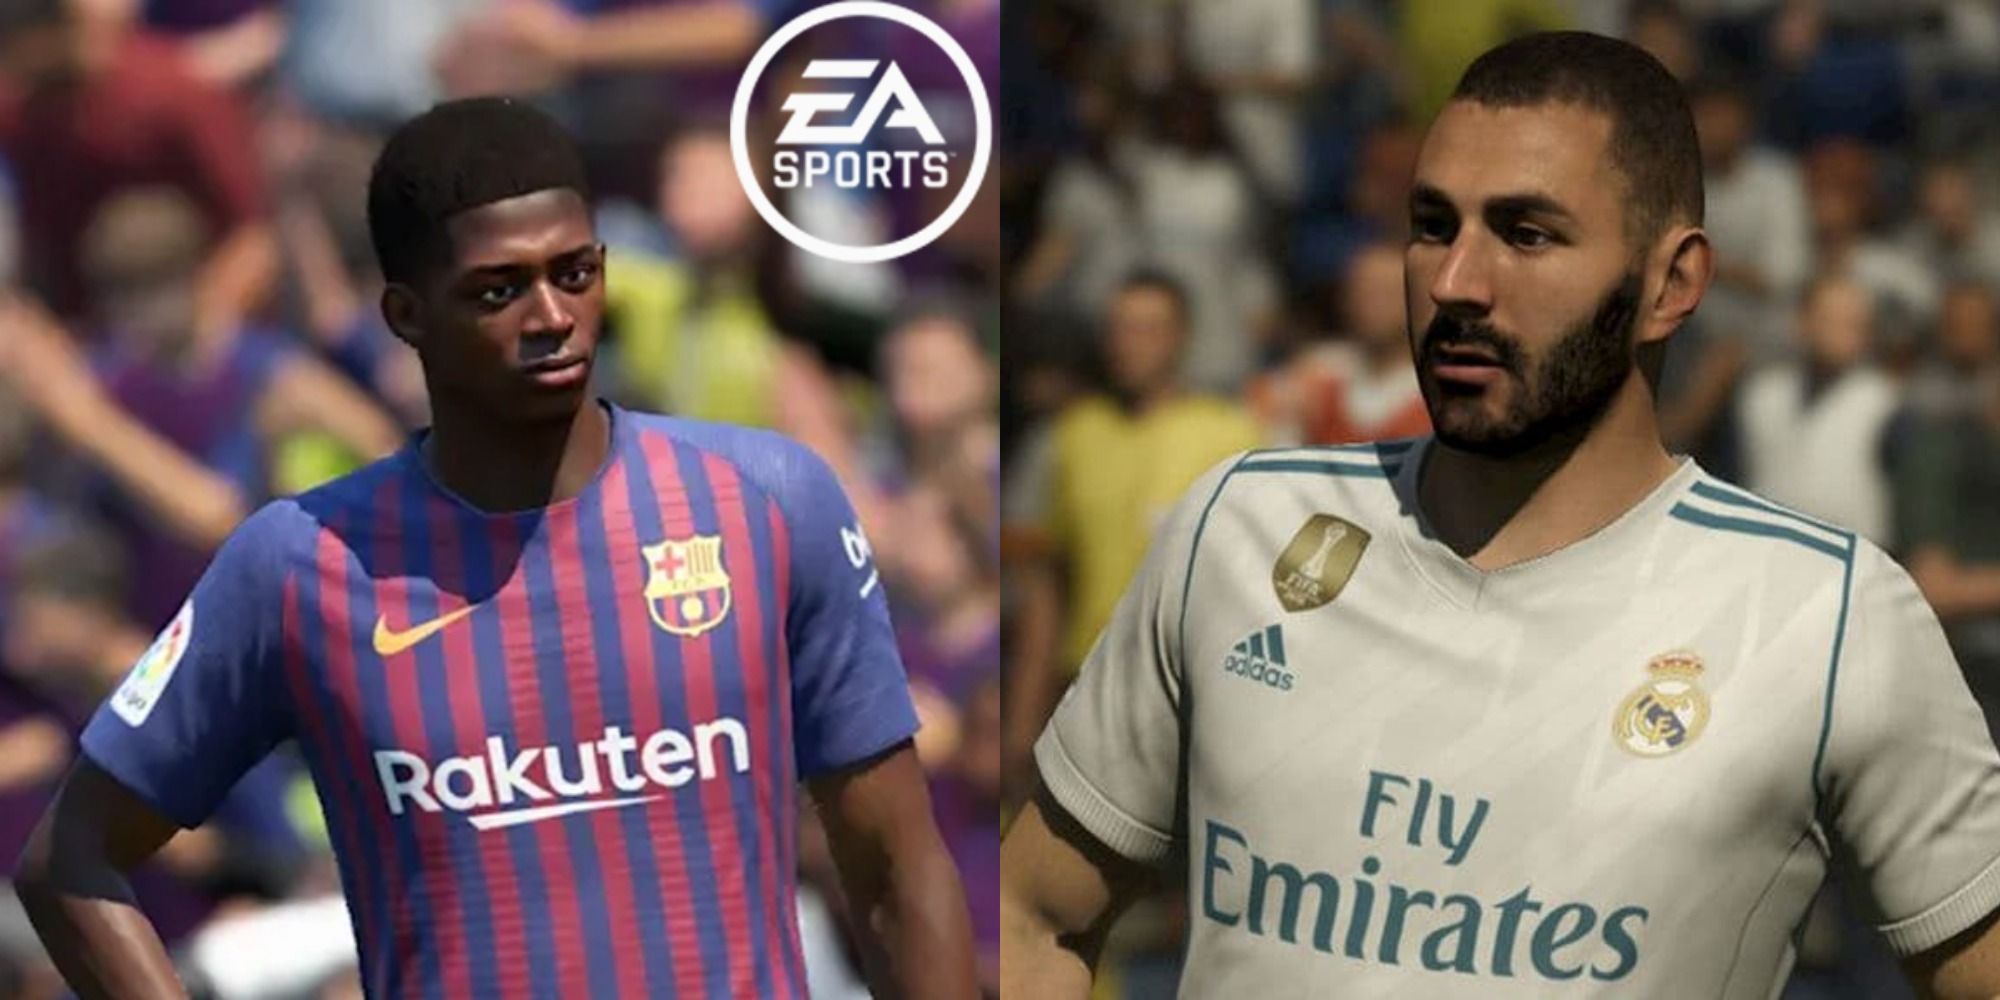 Split image of Ousmane Dembele and Karim Benzema from FIFA 22